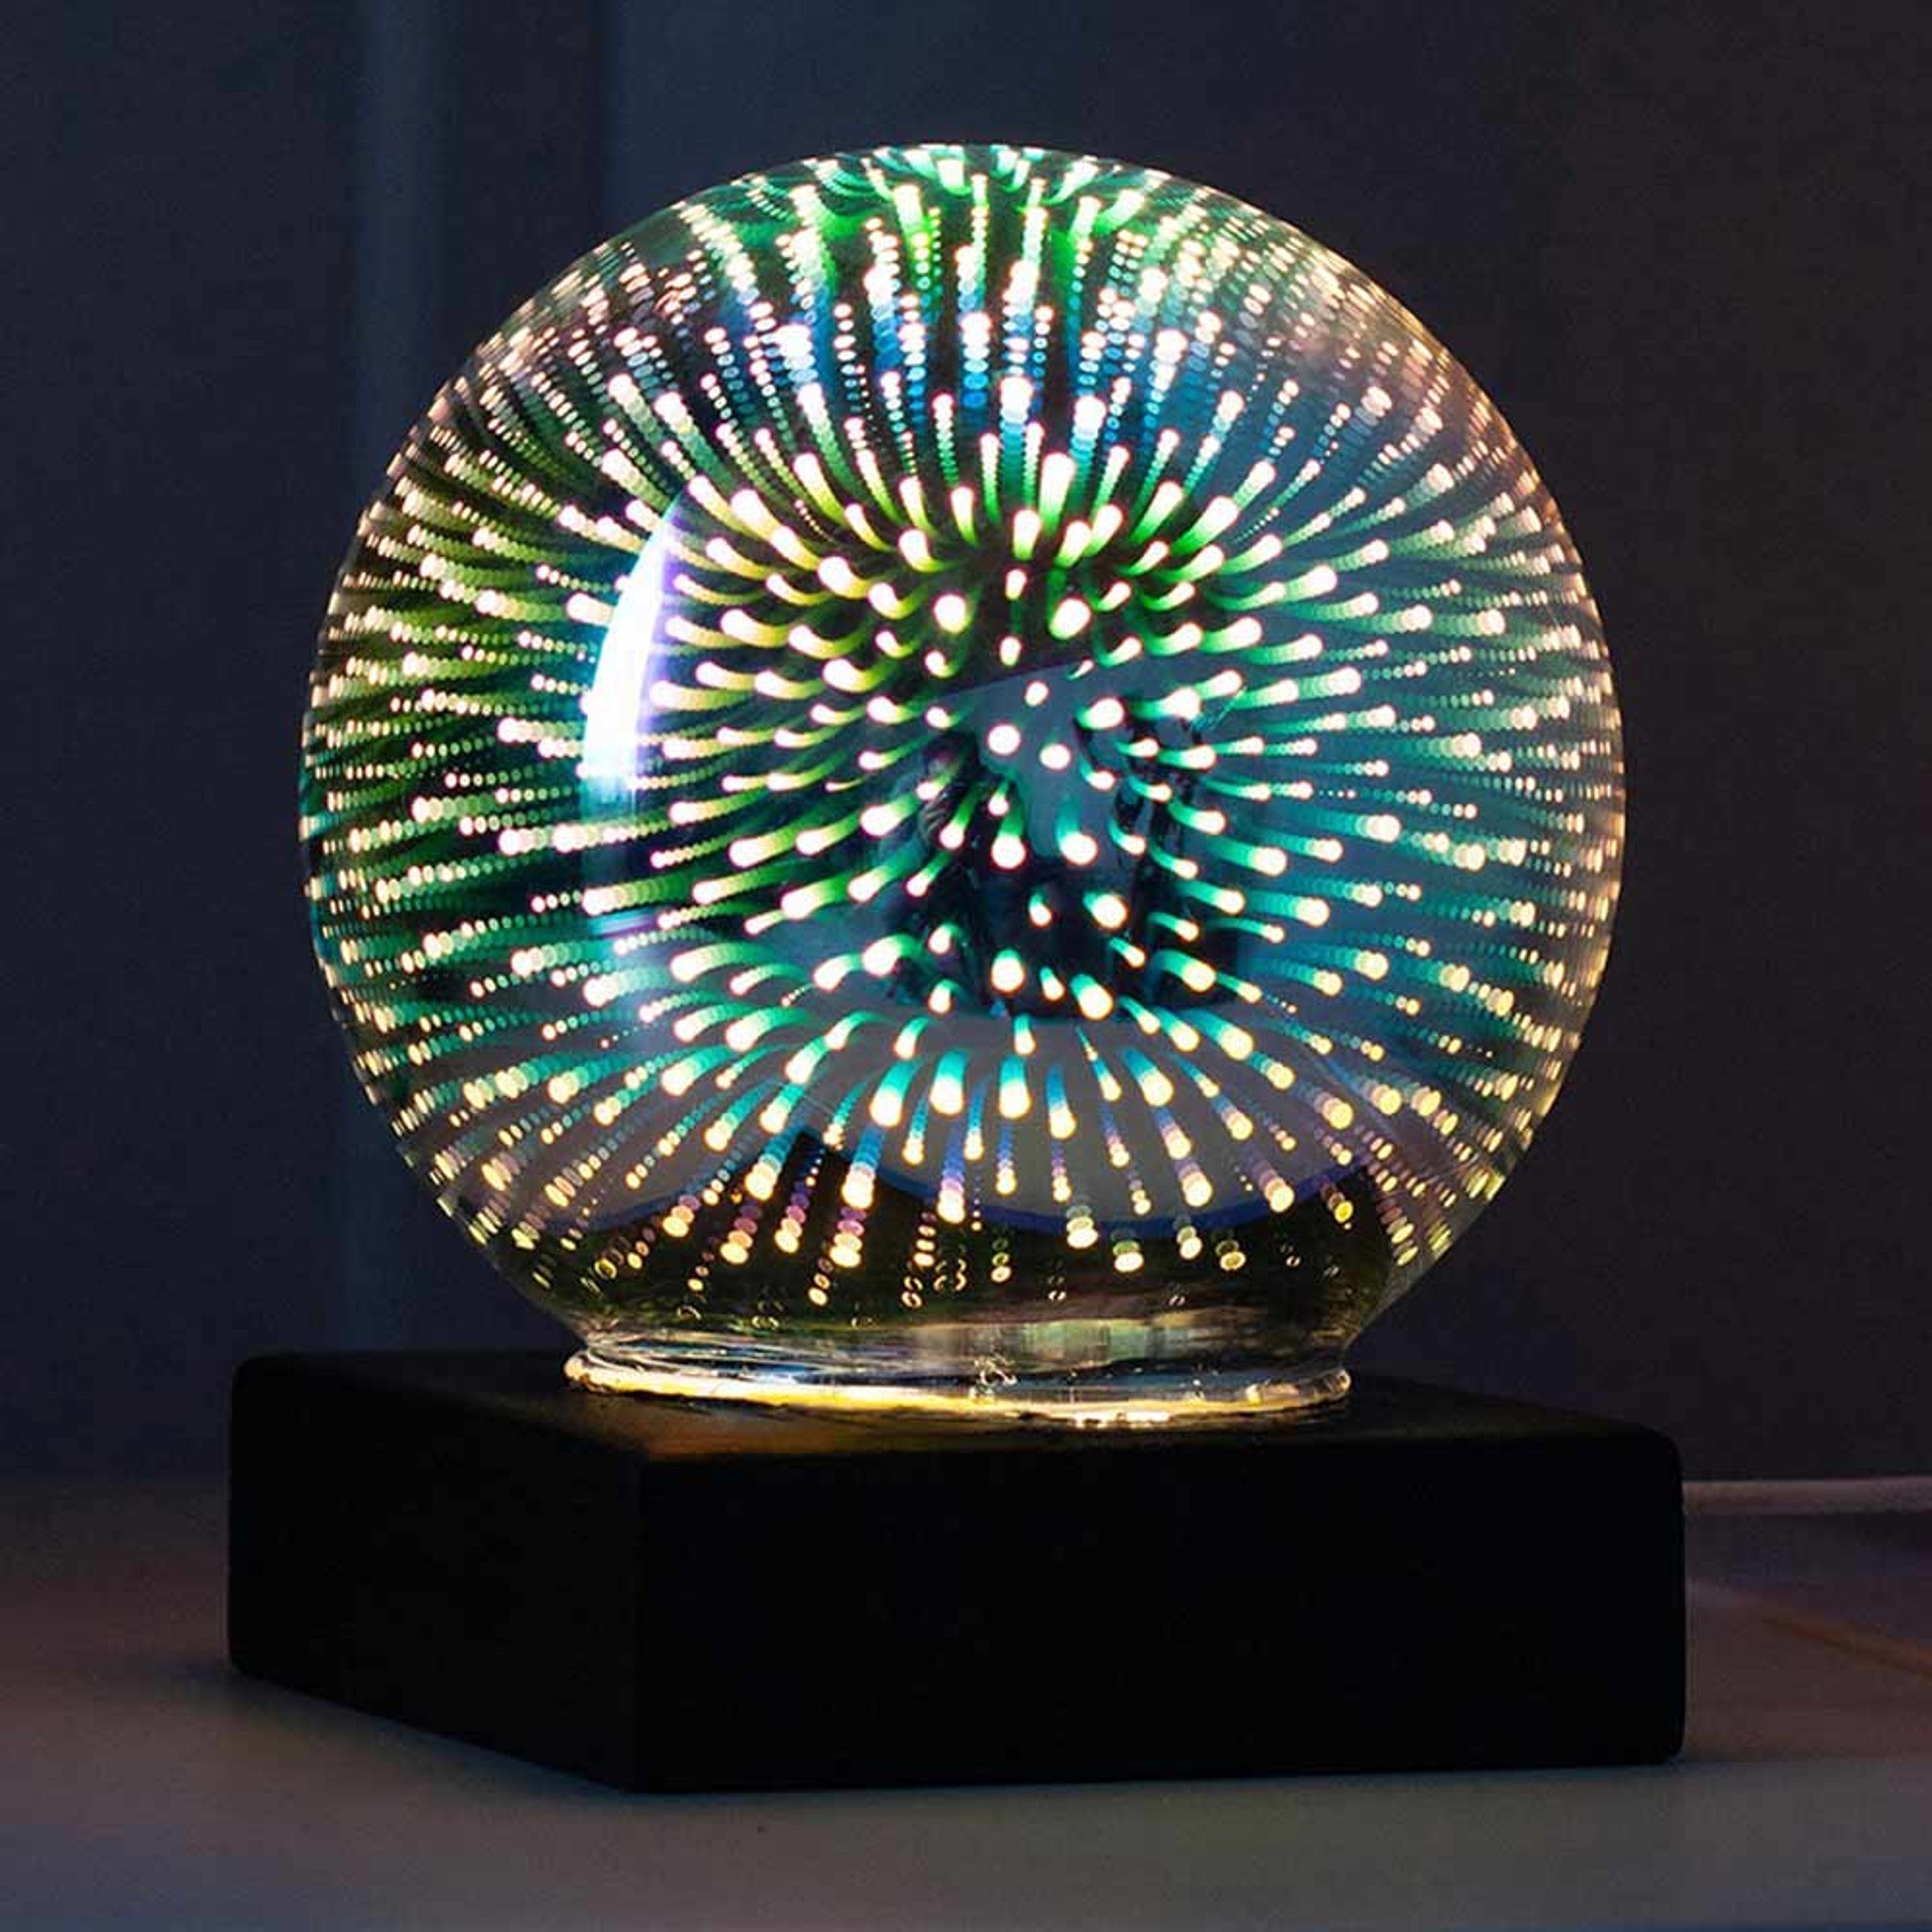 RED5 3D LED Fibre Ball Light, Add a colourful touch to any room with this amazing LED 3D USB fibre ball light from RED5. This 12cm diameter glass ball emits colourful lights in a beautiful pattern giving your room an awesome LED glow.It is USB powered so you can easily place it anywhere. This fun little gadget would make an awesome gift to brighten up any room and its perfect for people of all ages, great for getting the party started! It is ideal for any occasion. Features: Ball Diameter: 12cm Includes a 1